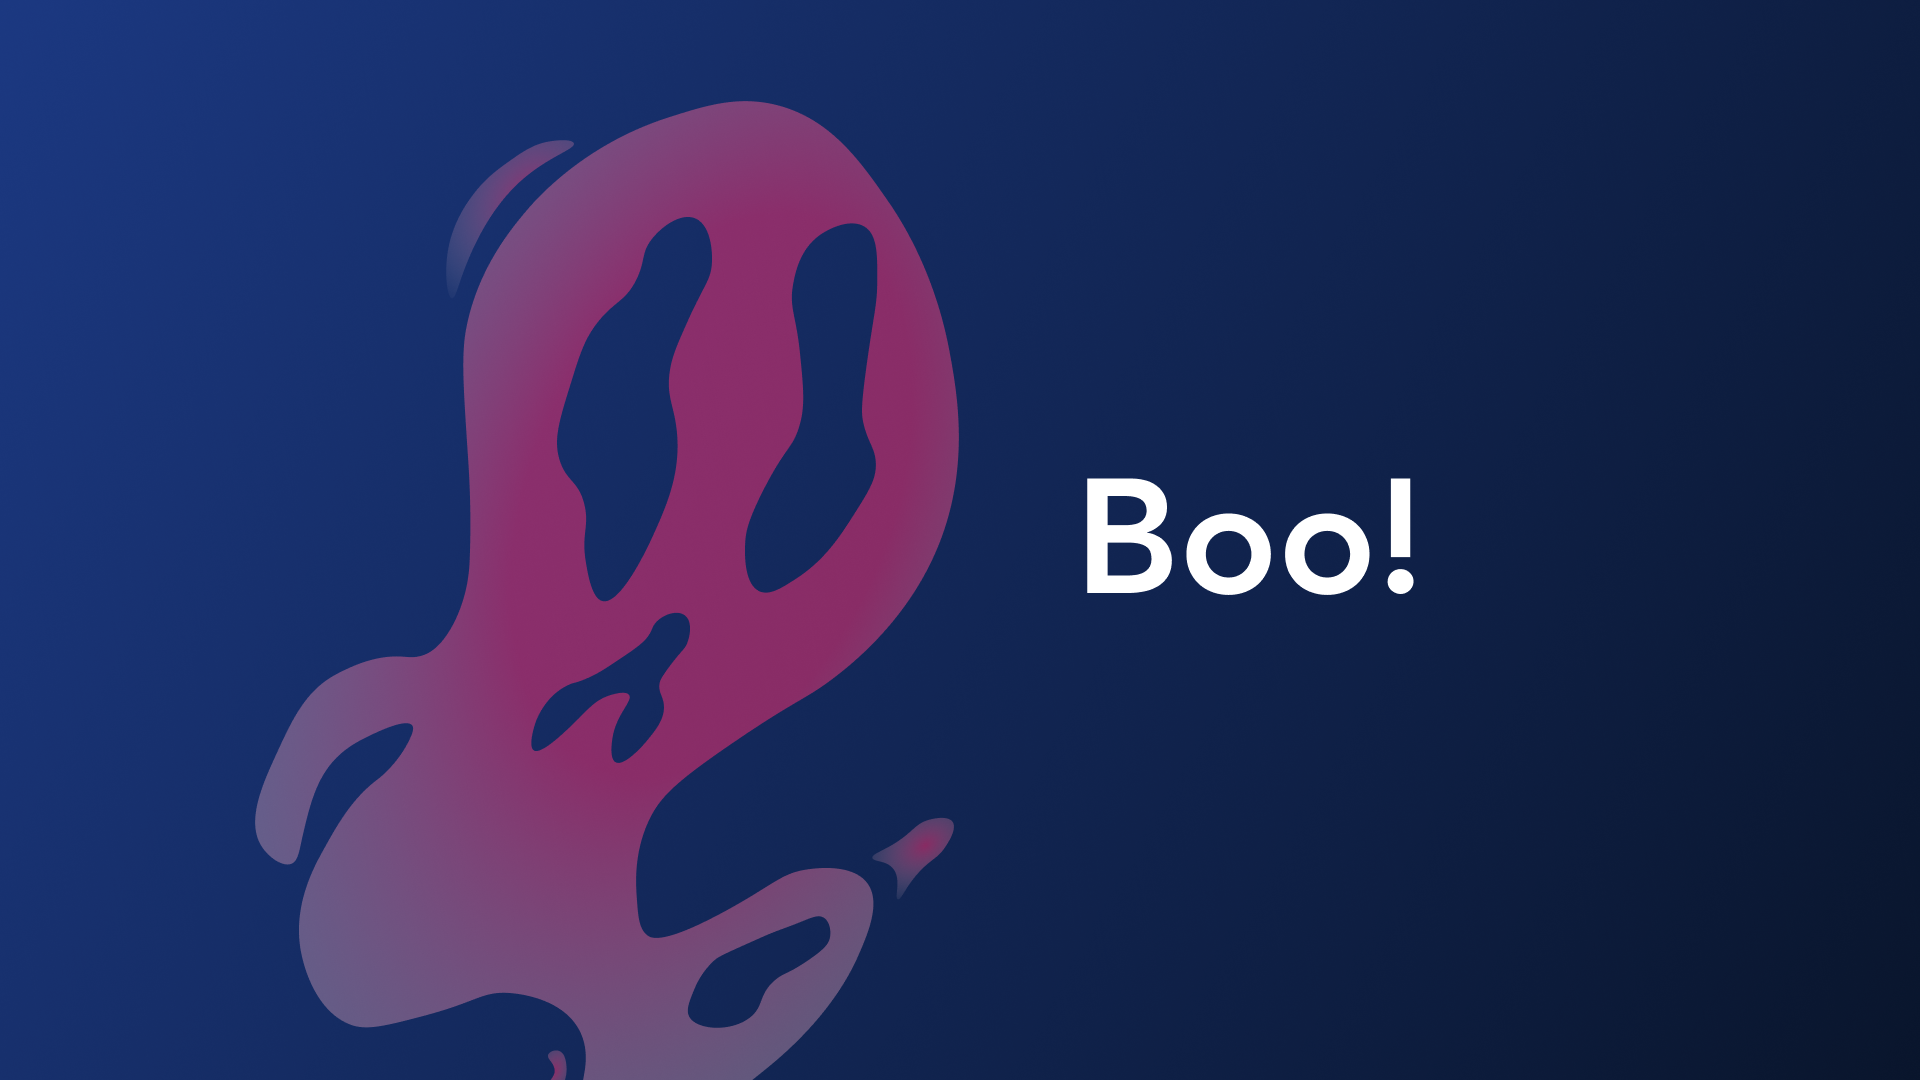 Prospects that go boo - ghosting in sales